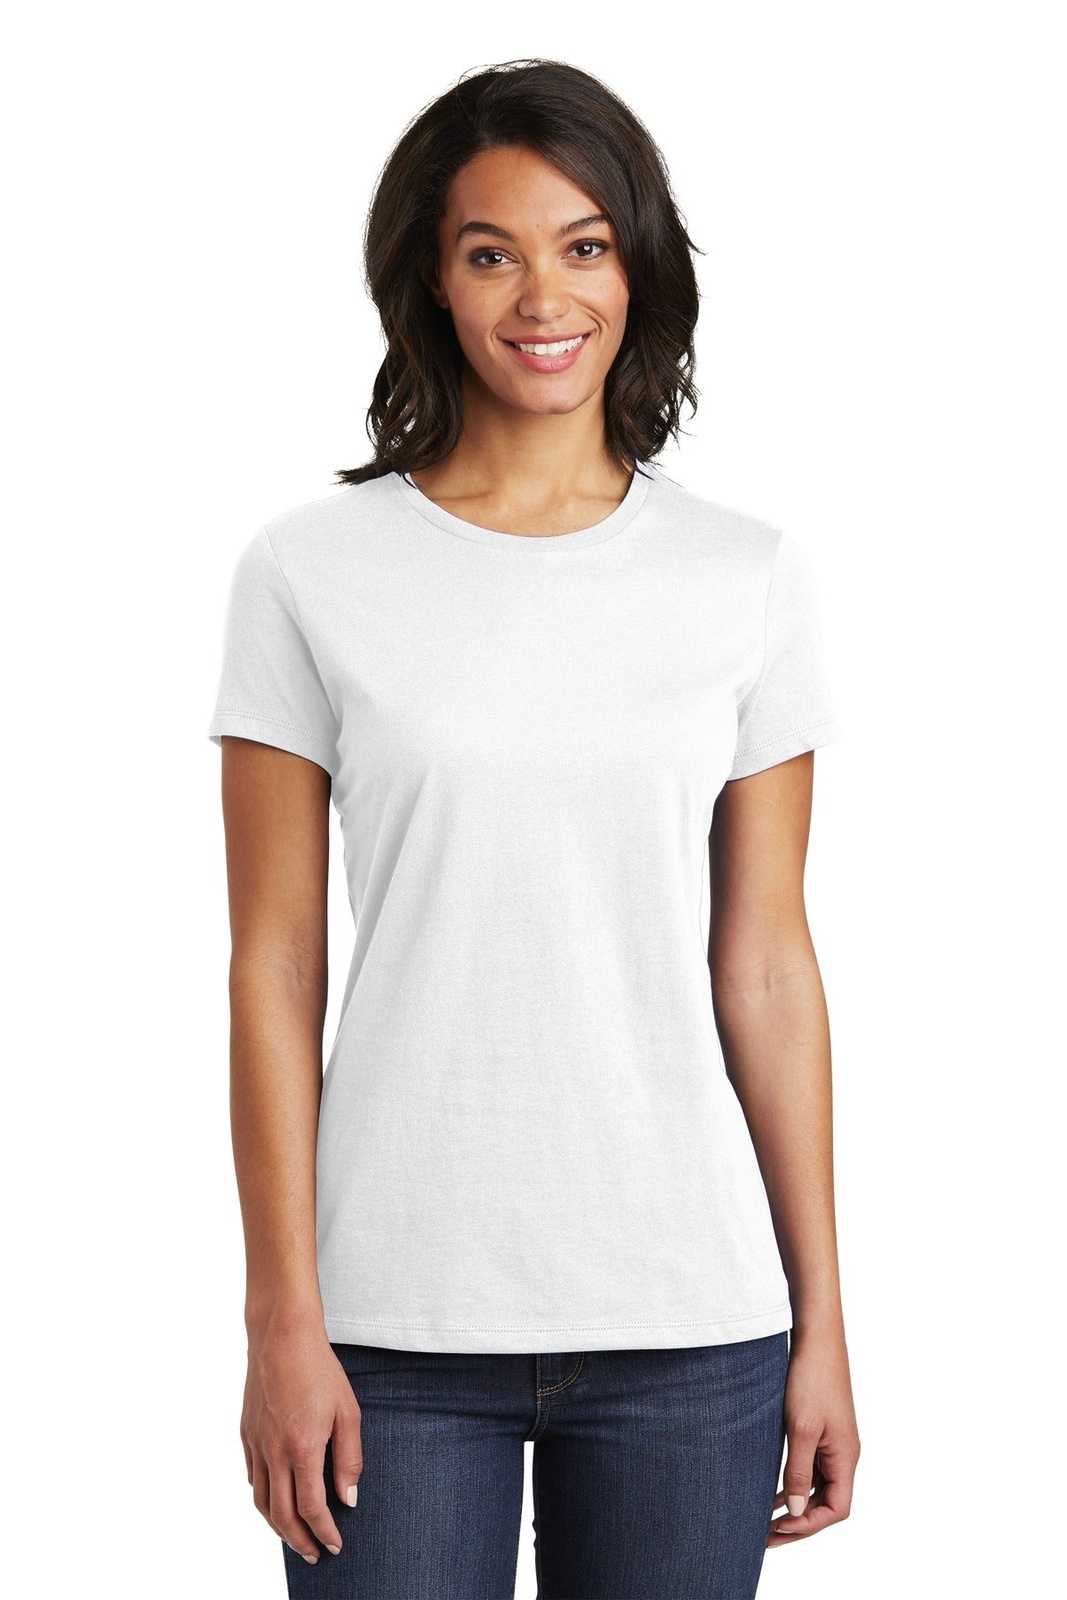 District DT6002 Women's Very Important Tee - White - HIT a Double - 1